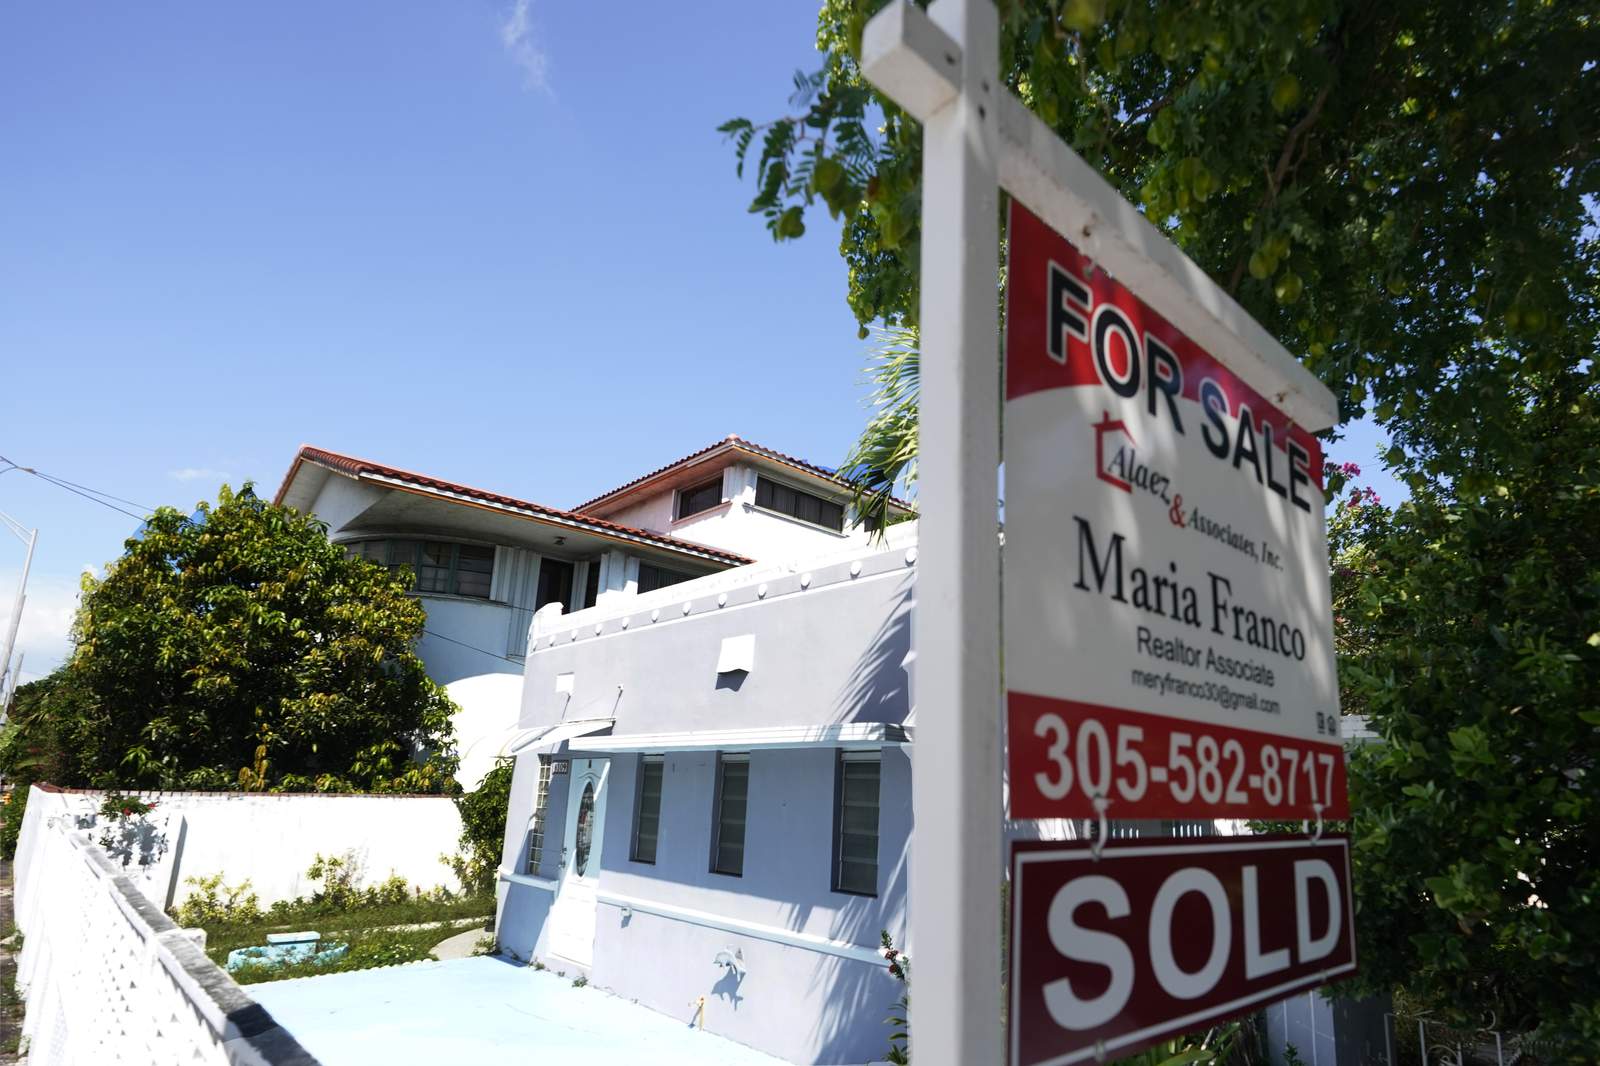 Single women own more homes in Miami and Tampa than in most cities across the US